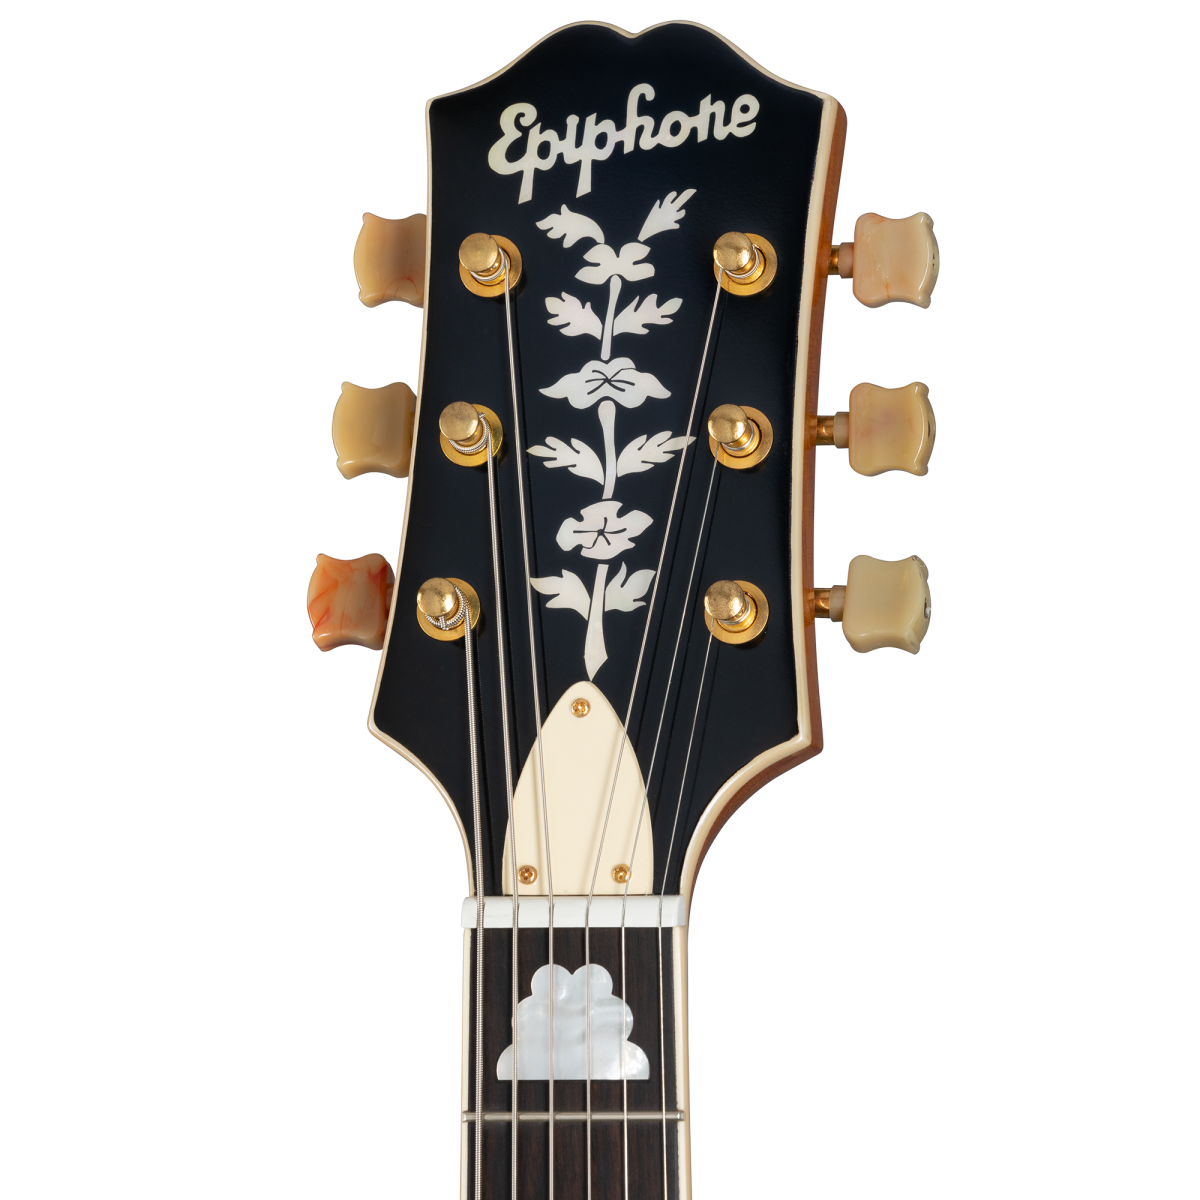 150th Anniversary Zephyr DeLuxe Regent, Aged Antique Natural 